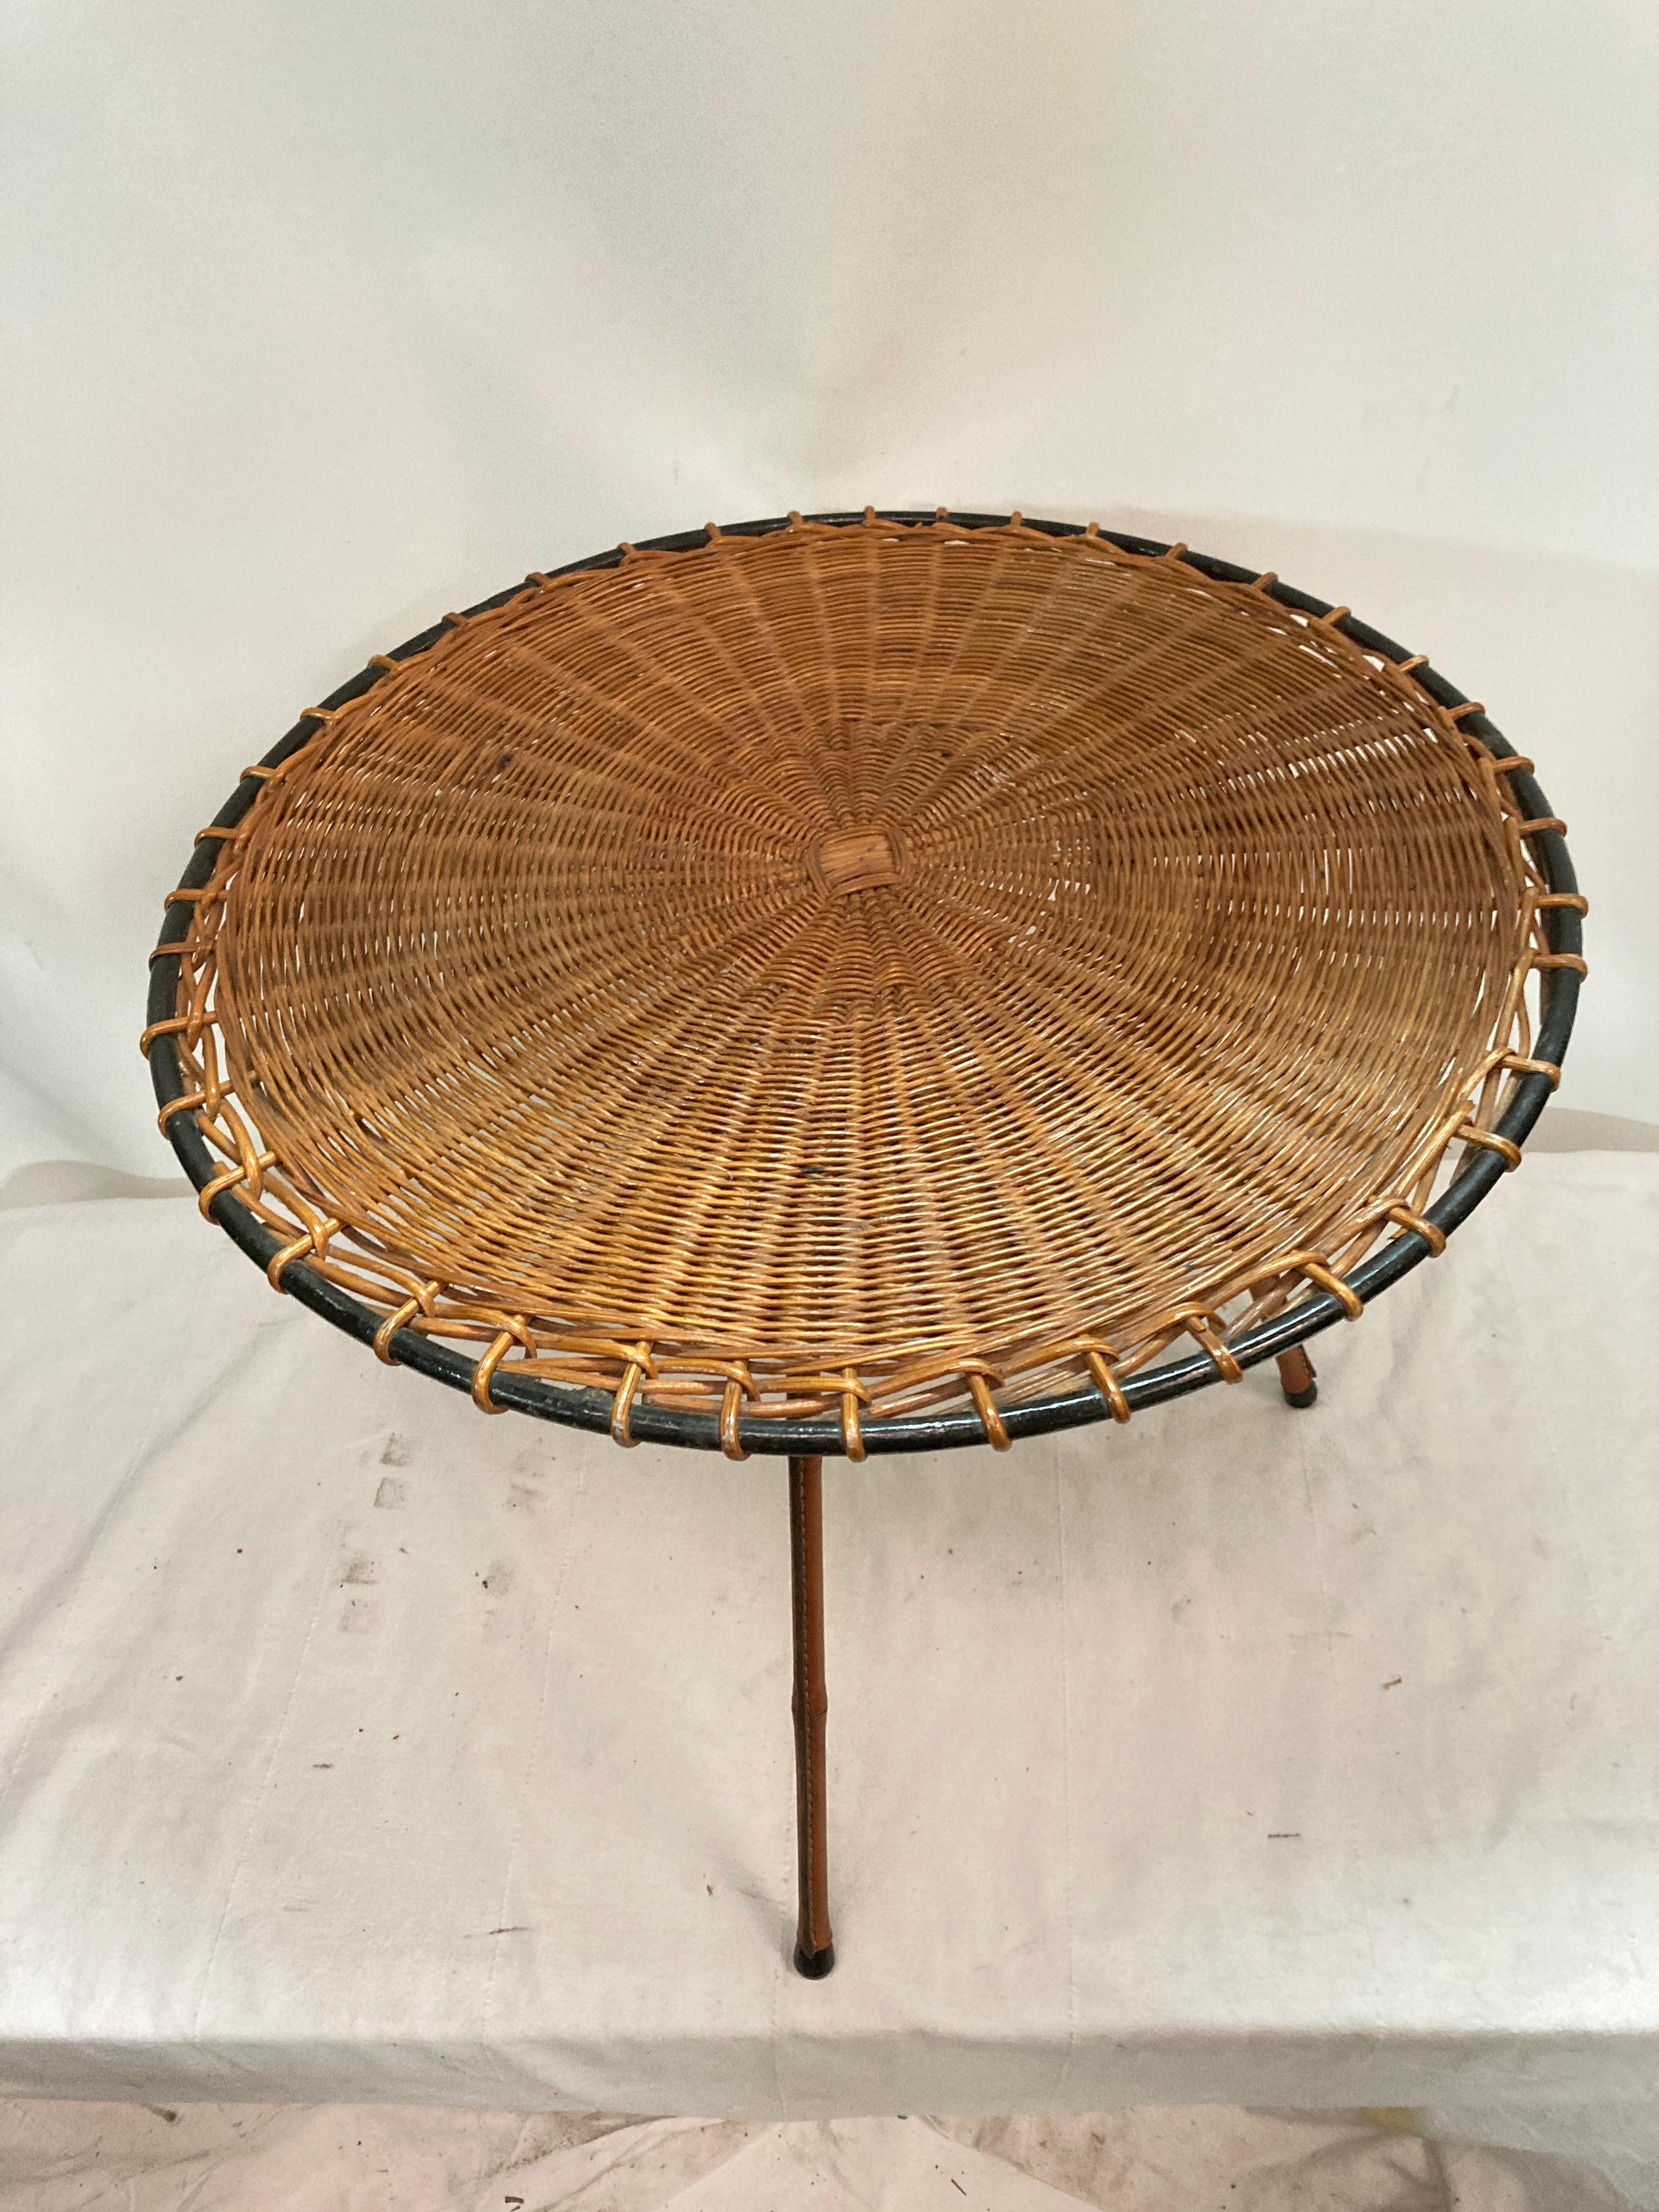 Very nice side table or occasional table with rattan top and stitched leather legs in the bamboo style
France
1950's